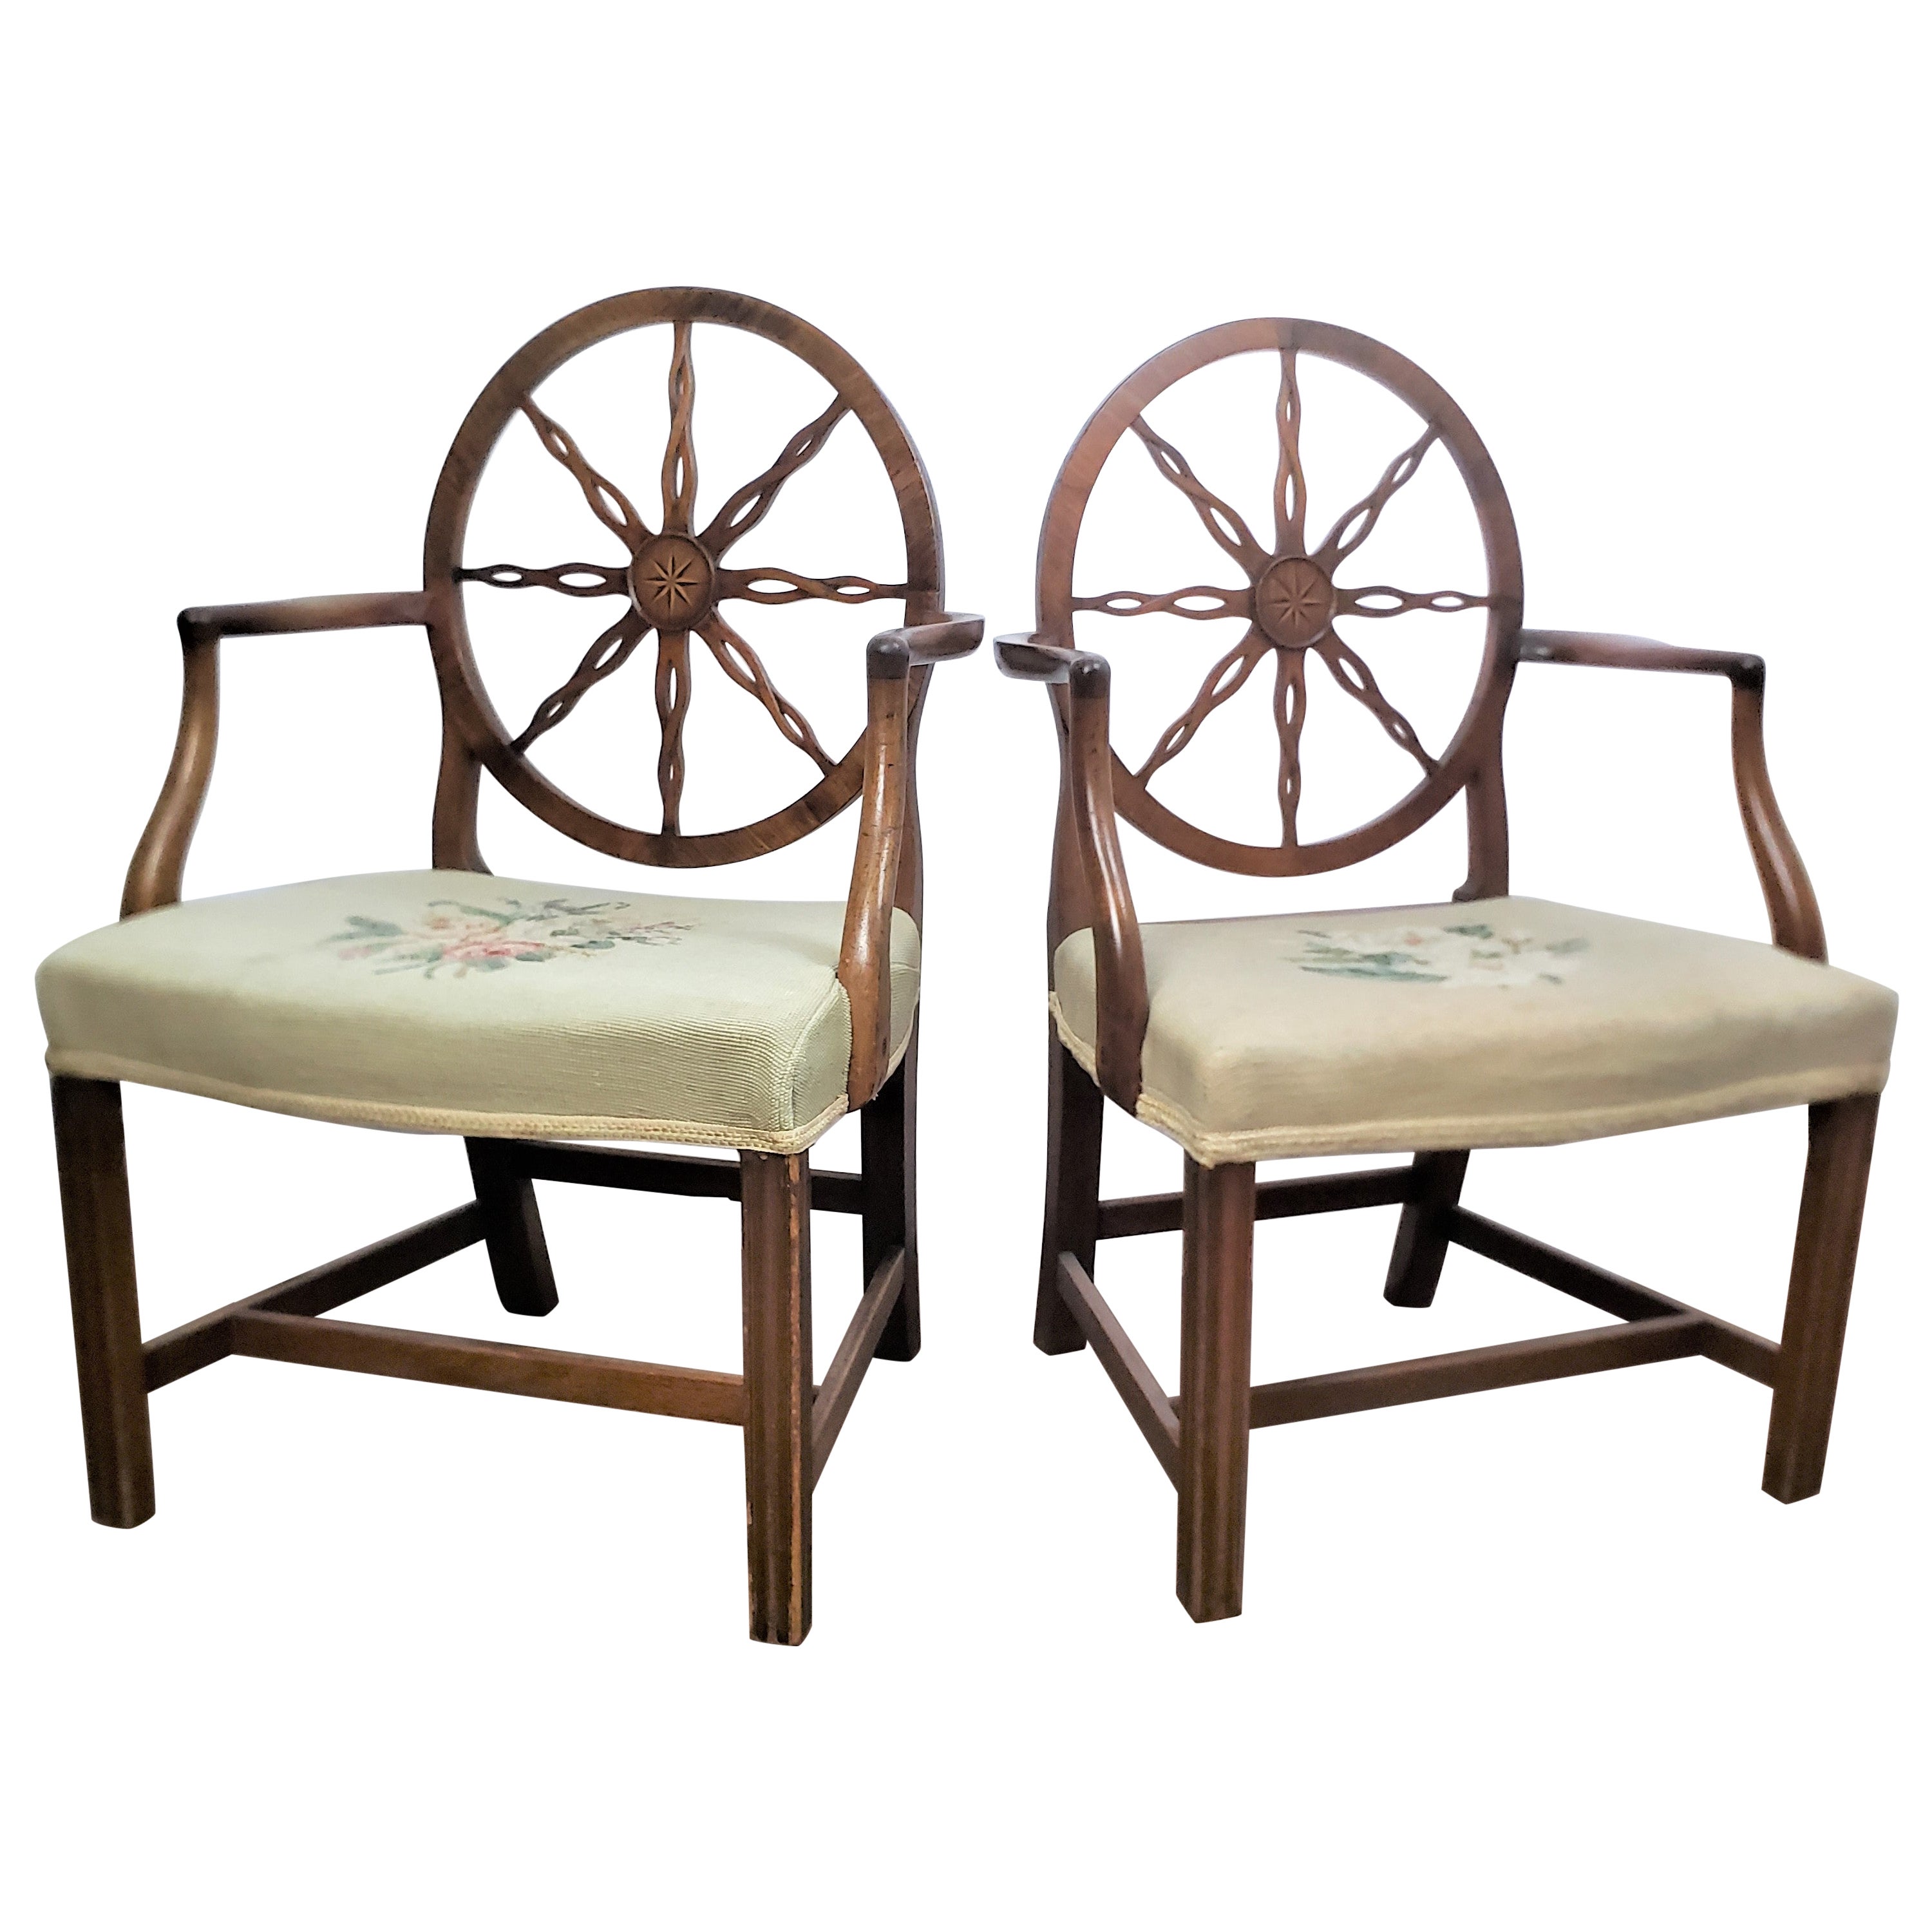 Pair of Antique King George III Period Wheelback Armchair or Side Chair Frames